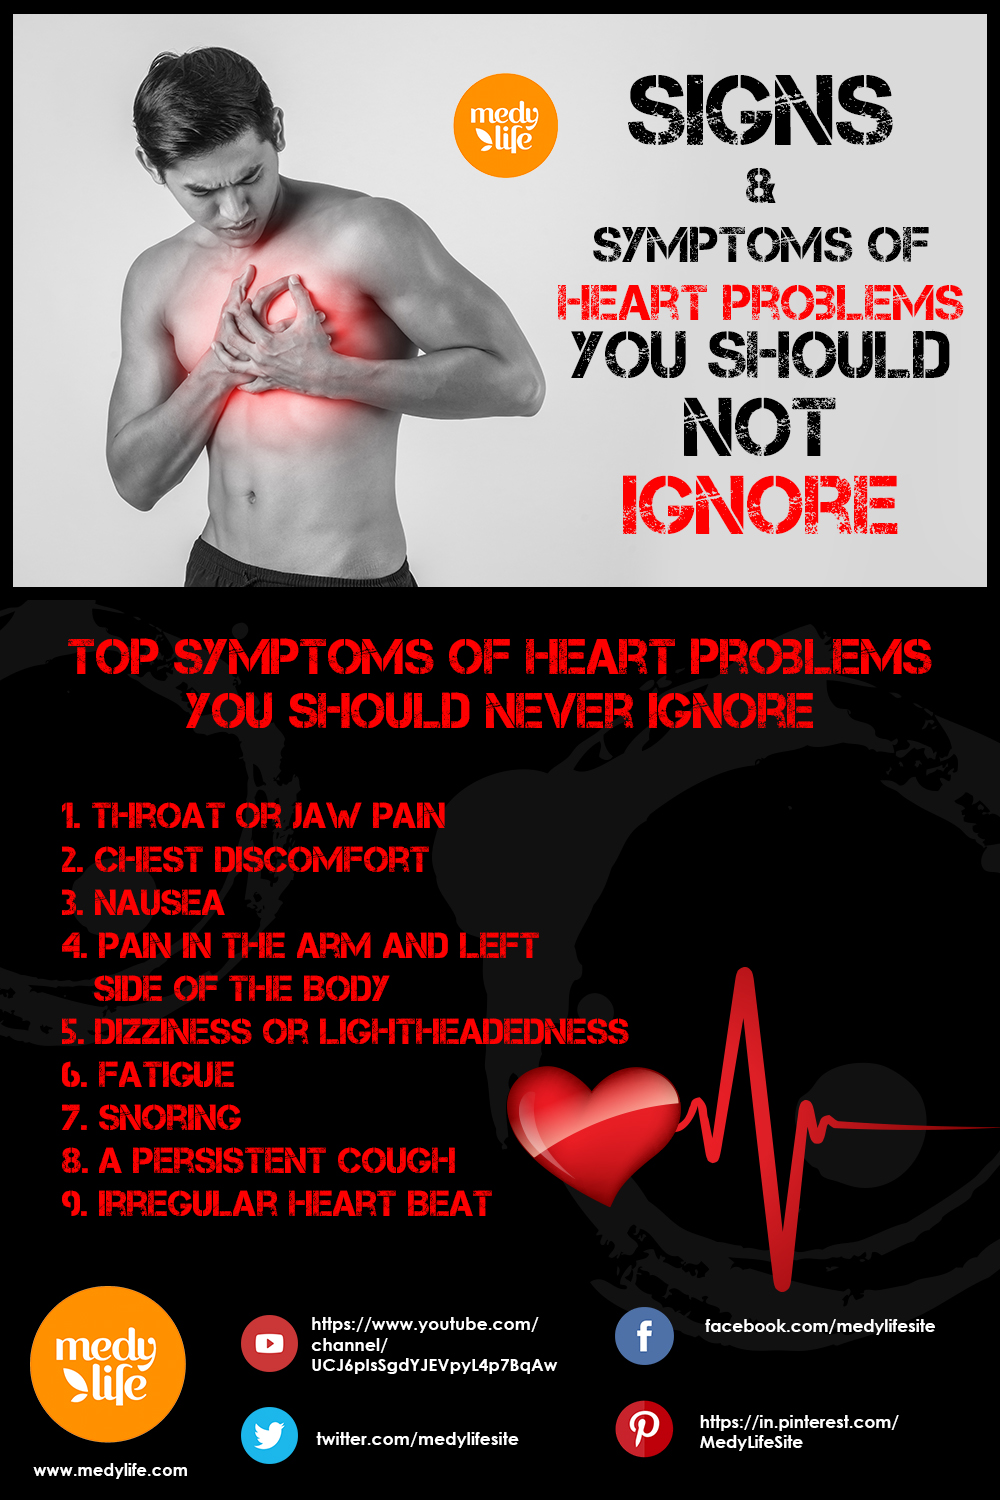 Signs and Symptoms of Heart Problems You Should Not Ignore INFO